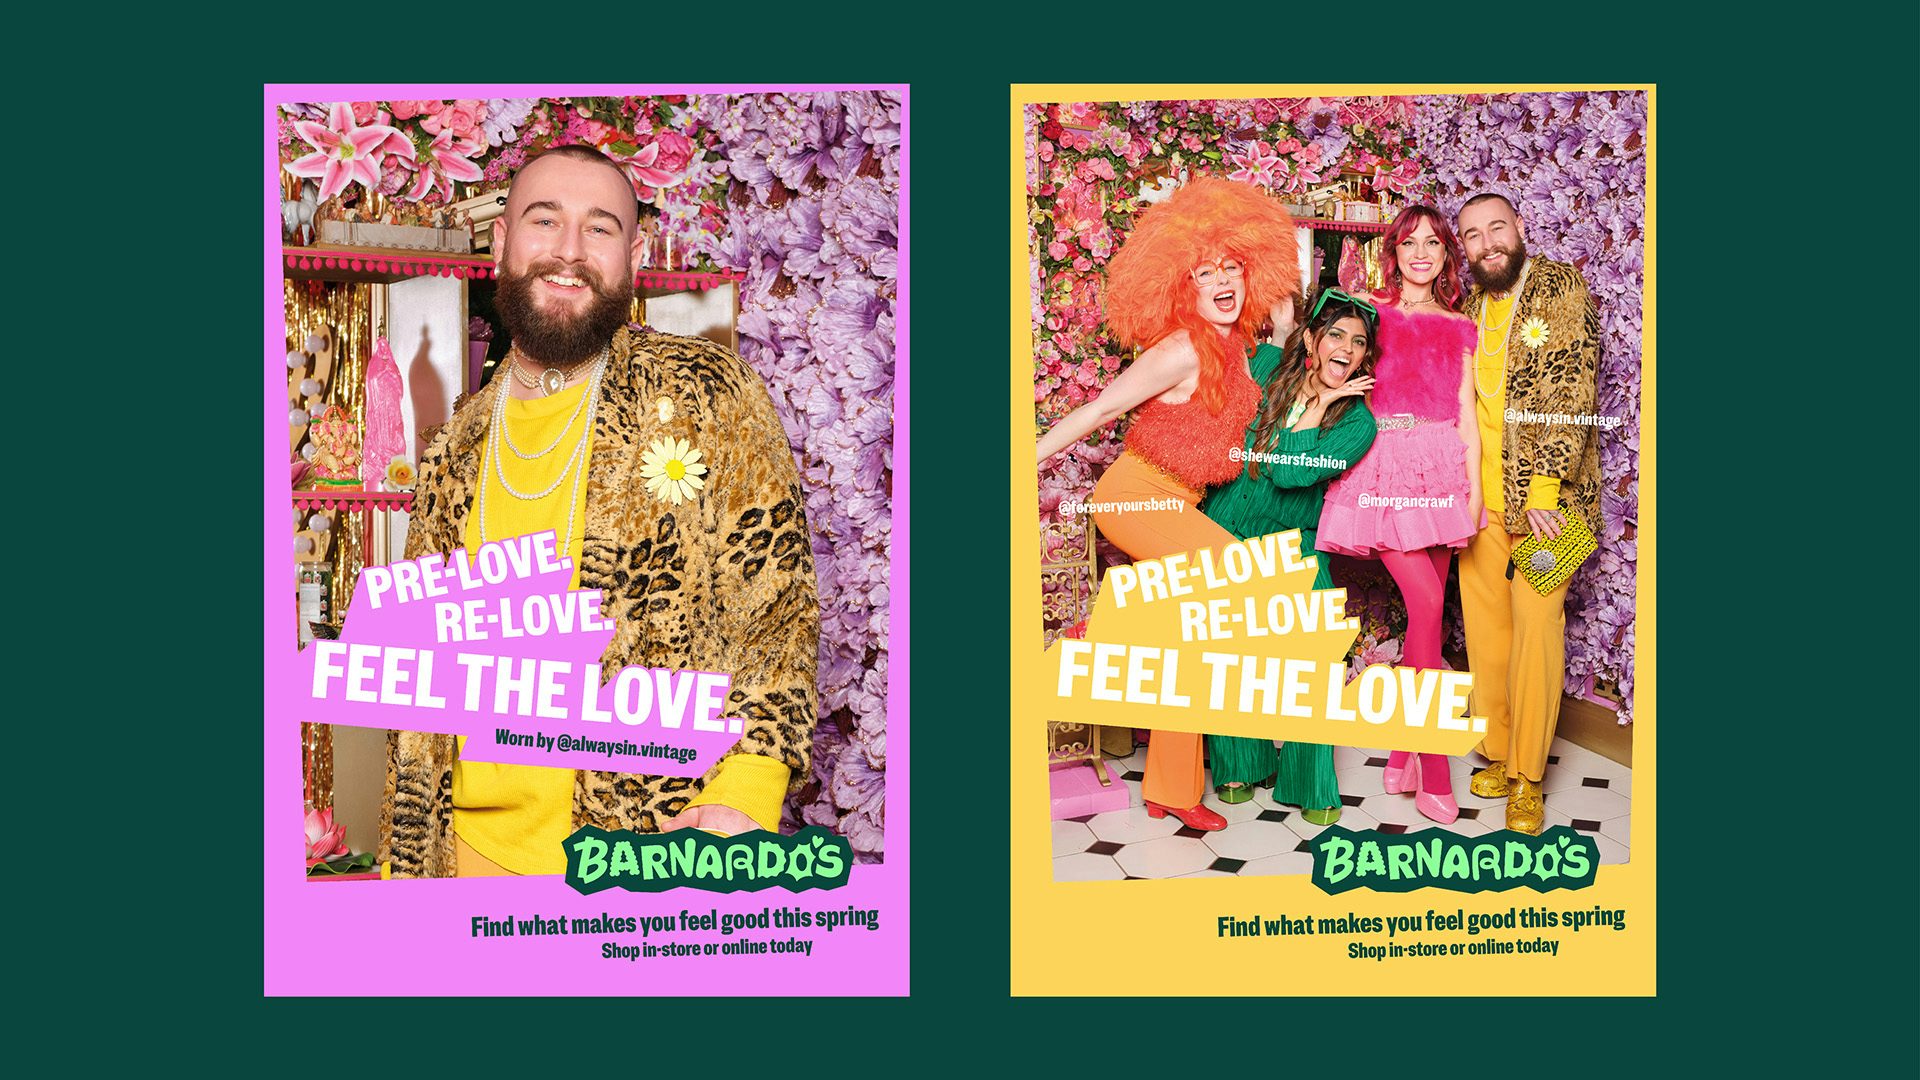 Image shows the new Barnardo's visual identity on two colourful vertical posters both headlined 'Pre-love, re-love, feel the love'